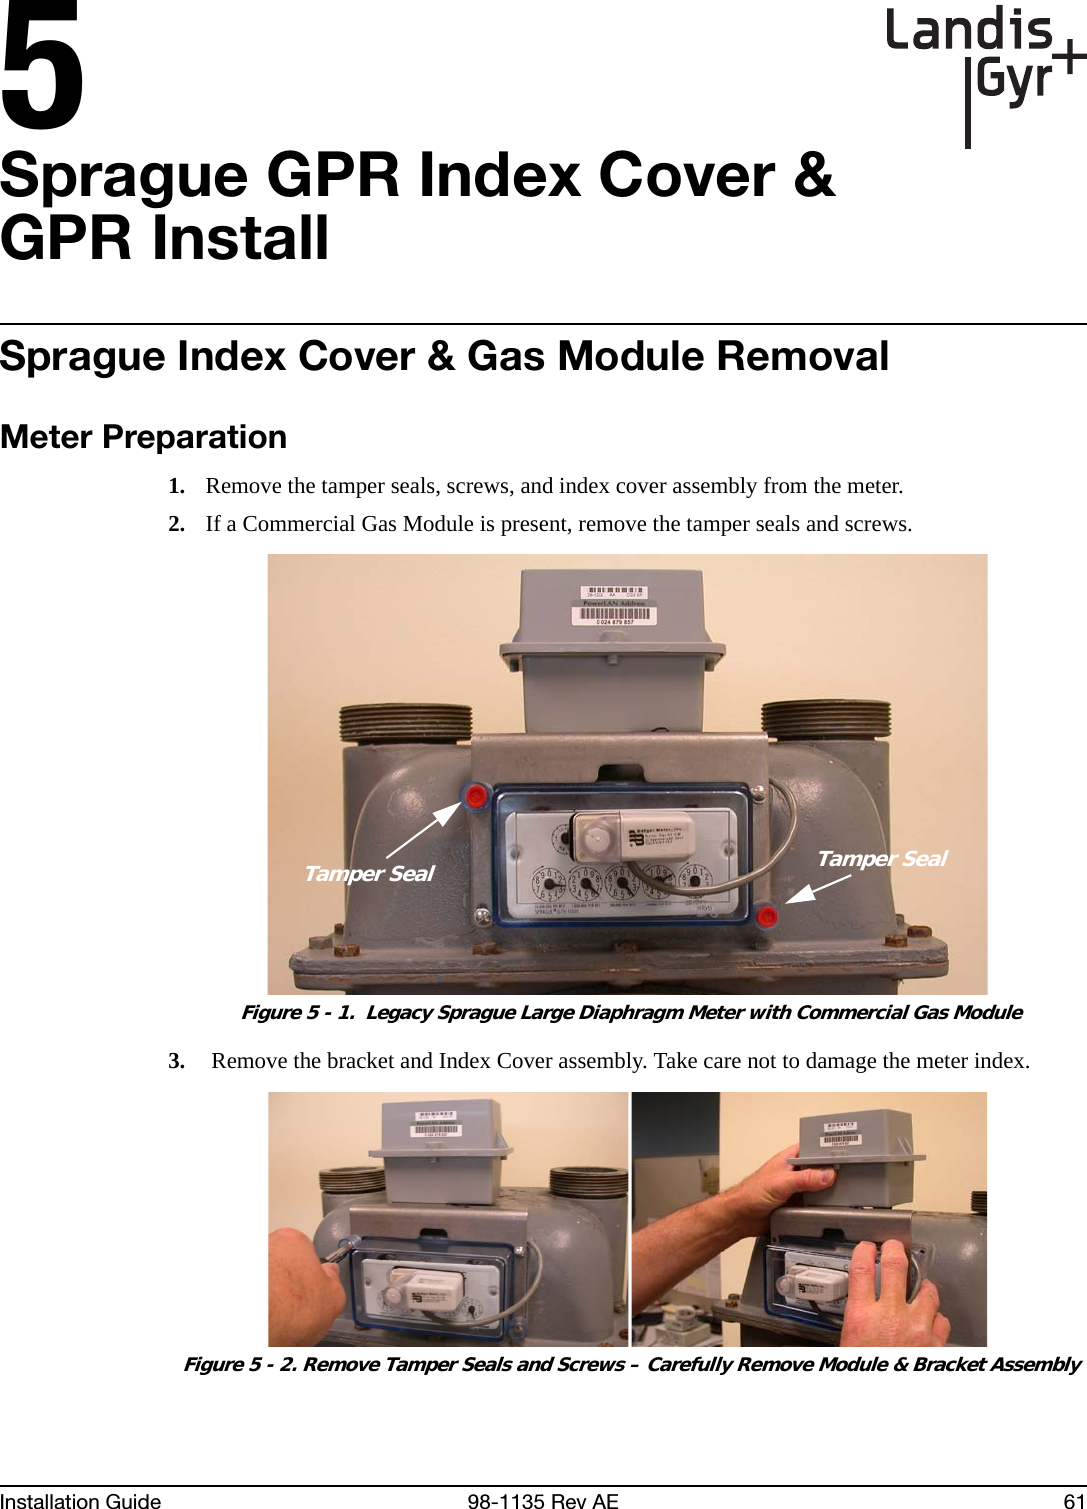 5Installation Guide 98-1135 Rev AE 61Sprague GPR Index Cover &amp; GPR InstallSprague Index Cover &amp; Gas Module RemovalMeter Preparation1. Remove the tamper seals, screws, and index cover assembly from the meter.2. If a Commercial Gas Module is present, remove the tamper seals and screws. Figure 5 - 1.  Legacy Sprague Large Diaphragm Meter with Commercial Gas Module3.  Remove the bracket and Index Cover assembly. Take care not to damage the meter index. Figure 5 - 2. Remove Tamper Seals and Screws – Carefully Remove Module &amp; Bracket AssemblyTamper SealTamper Seal